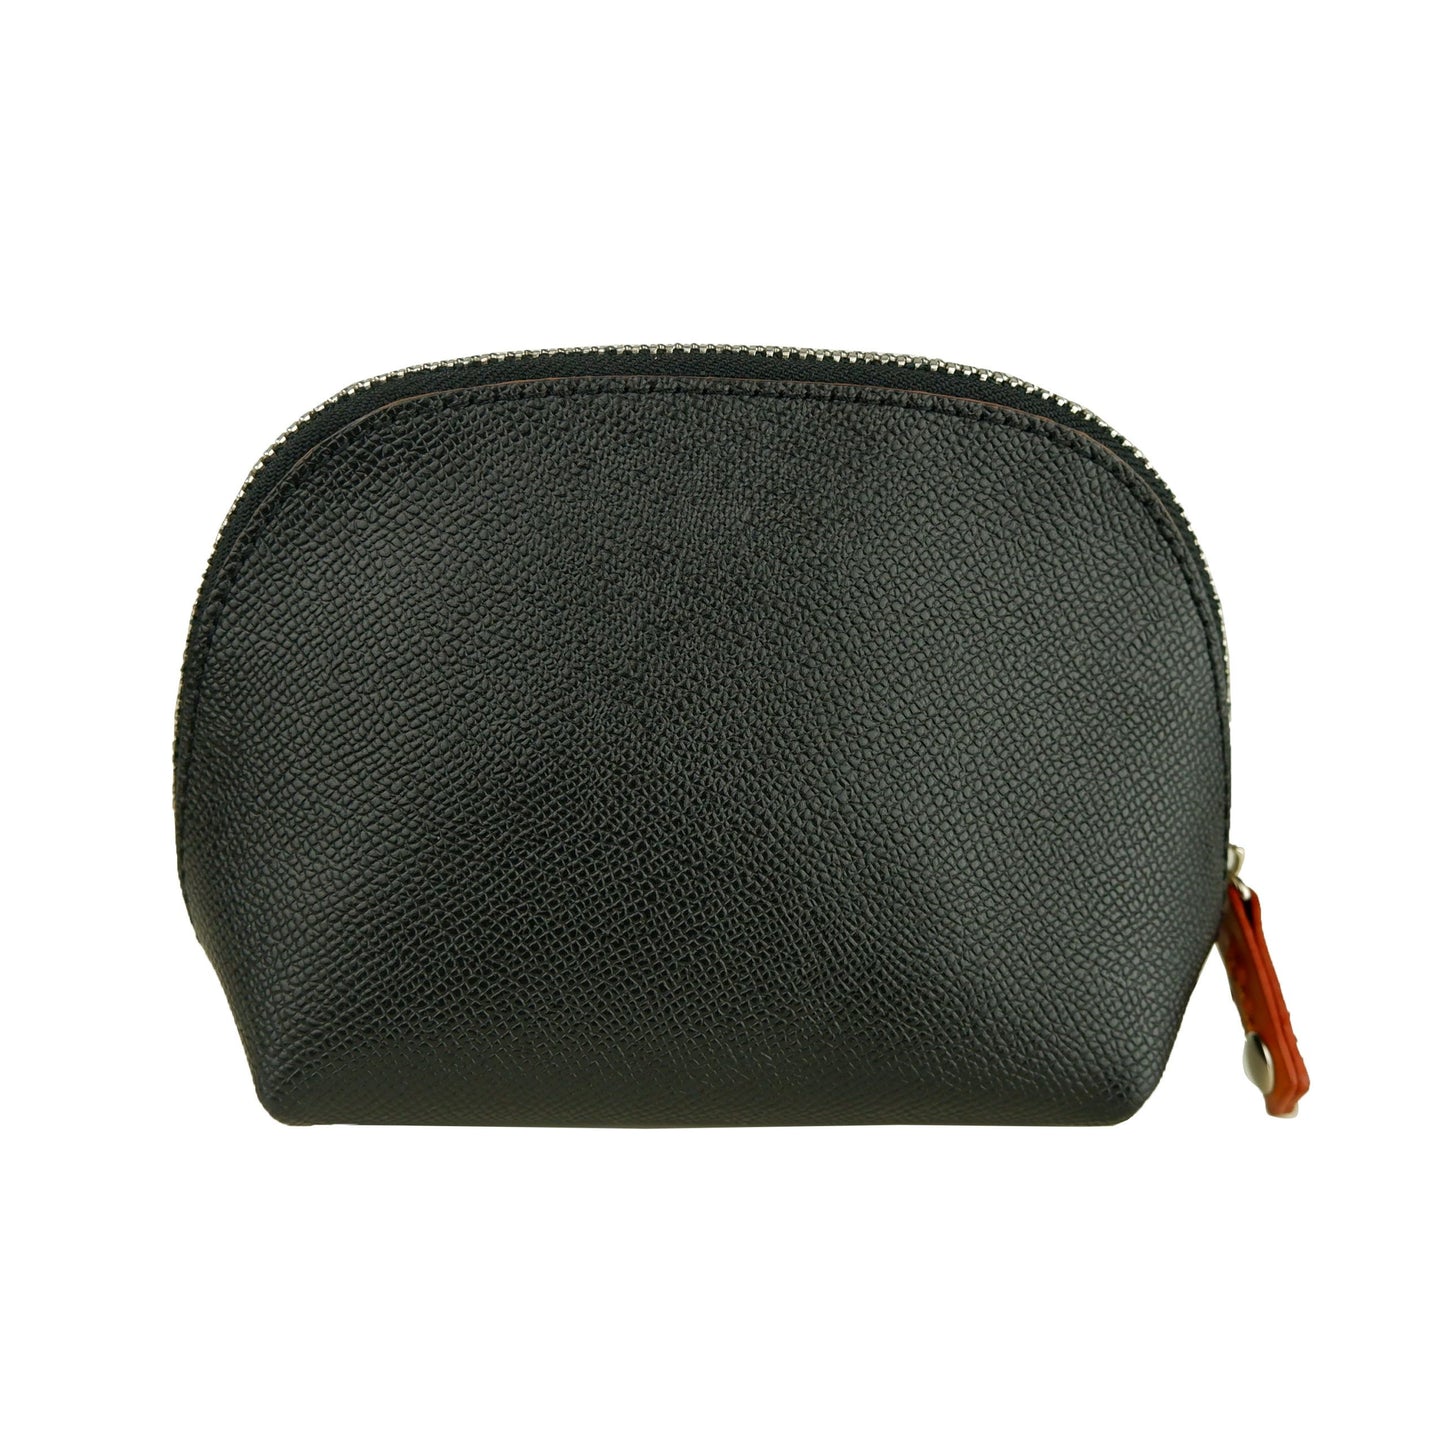 Chic Black Leather Cosmetics Pouch